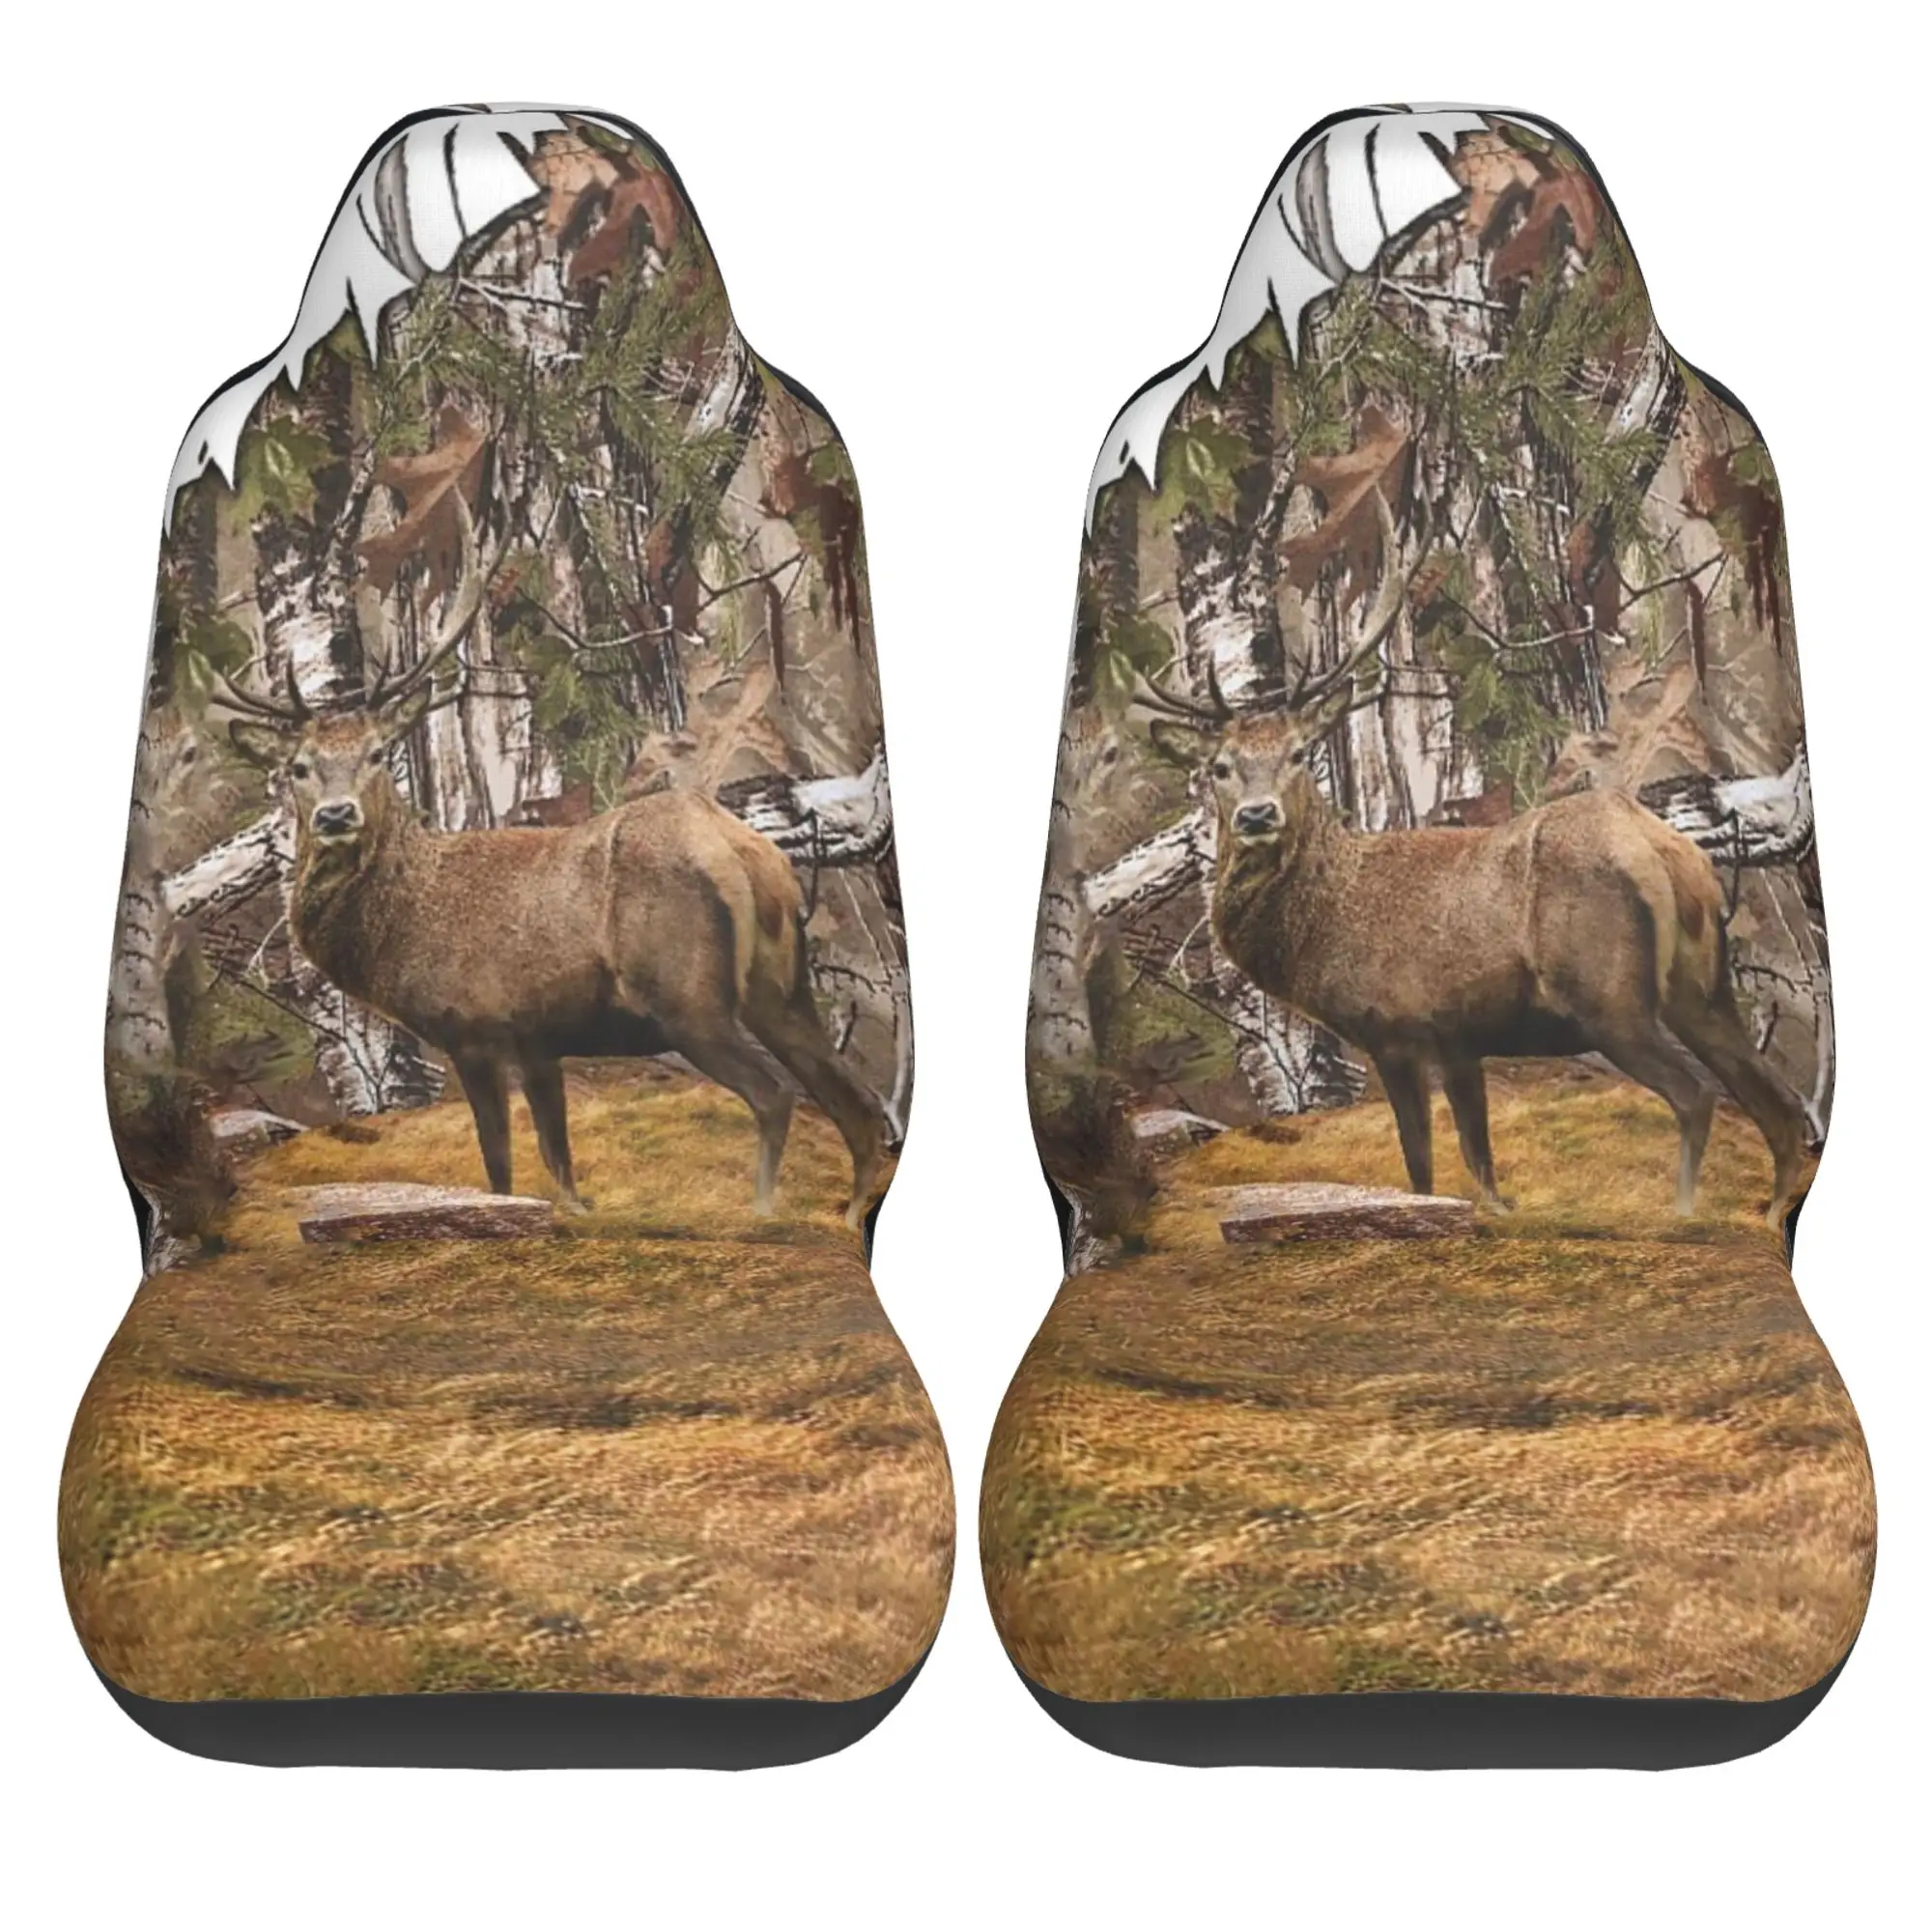 Nt front seat cover only for women men camo hunting forest theme driver seat protectors thumb200